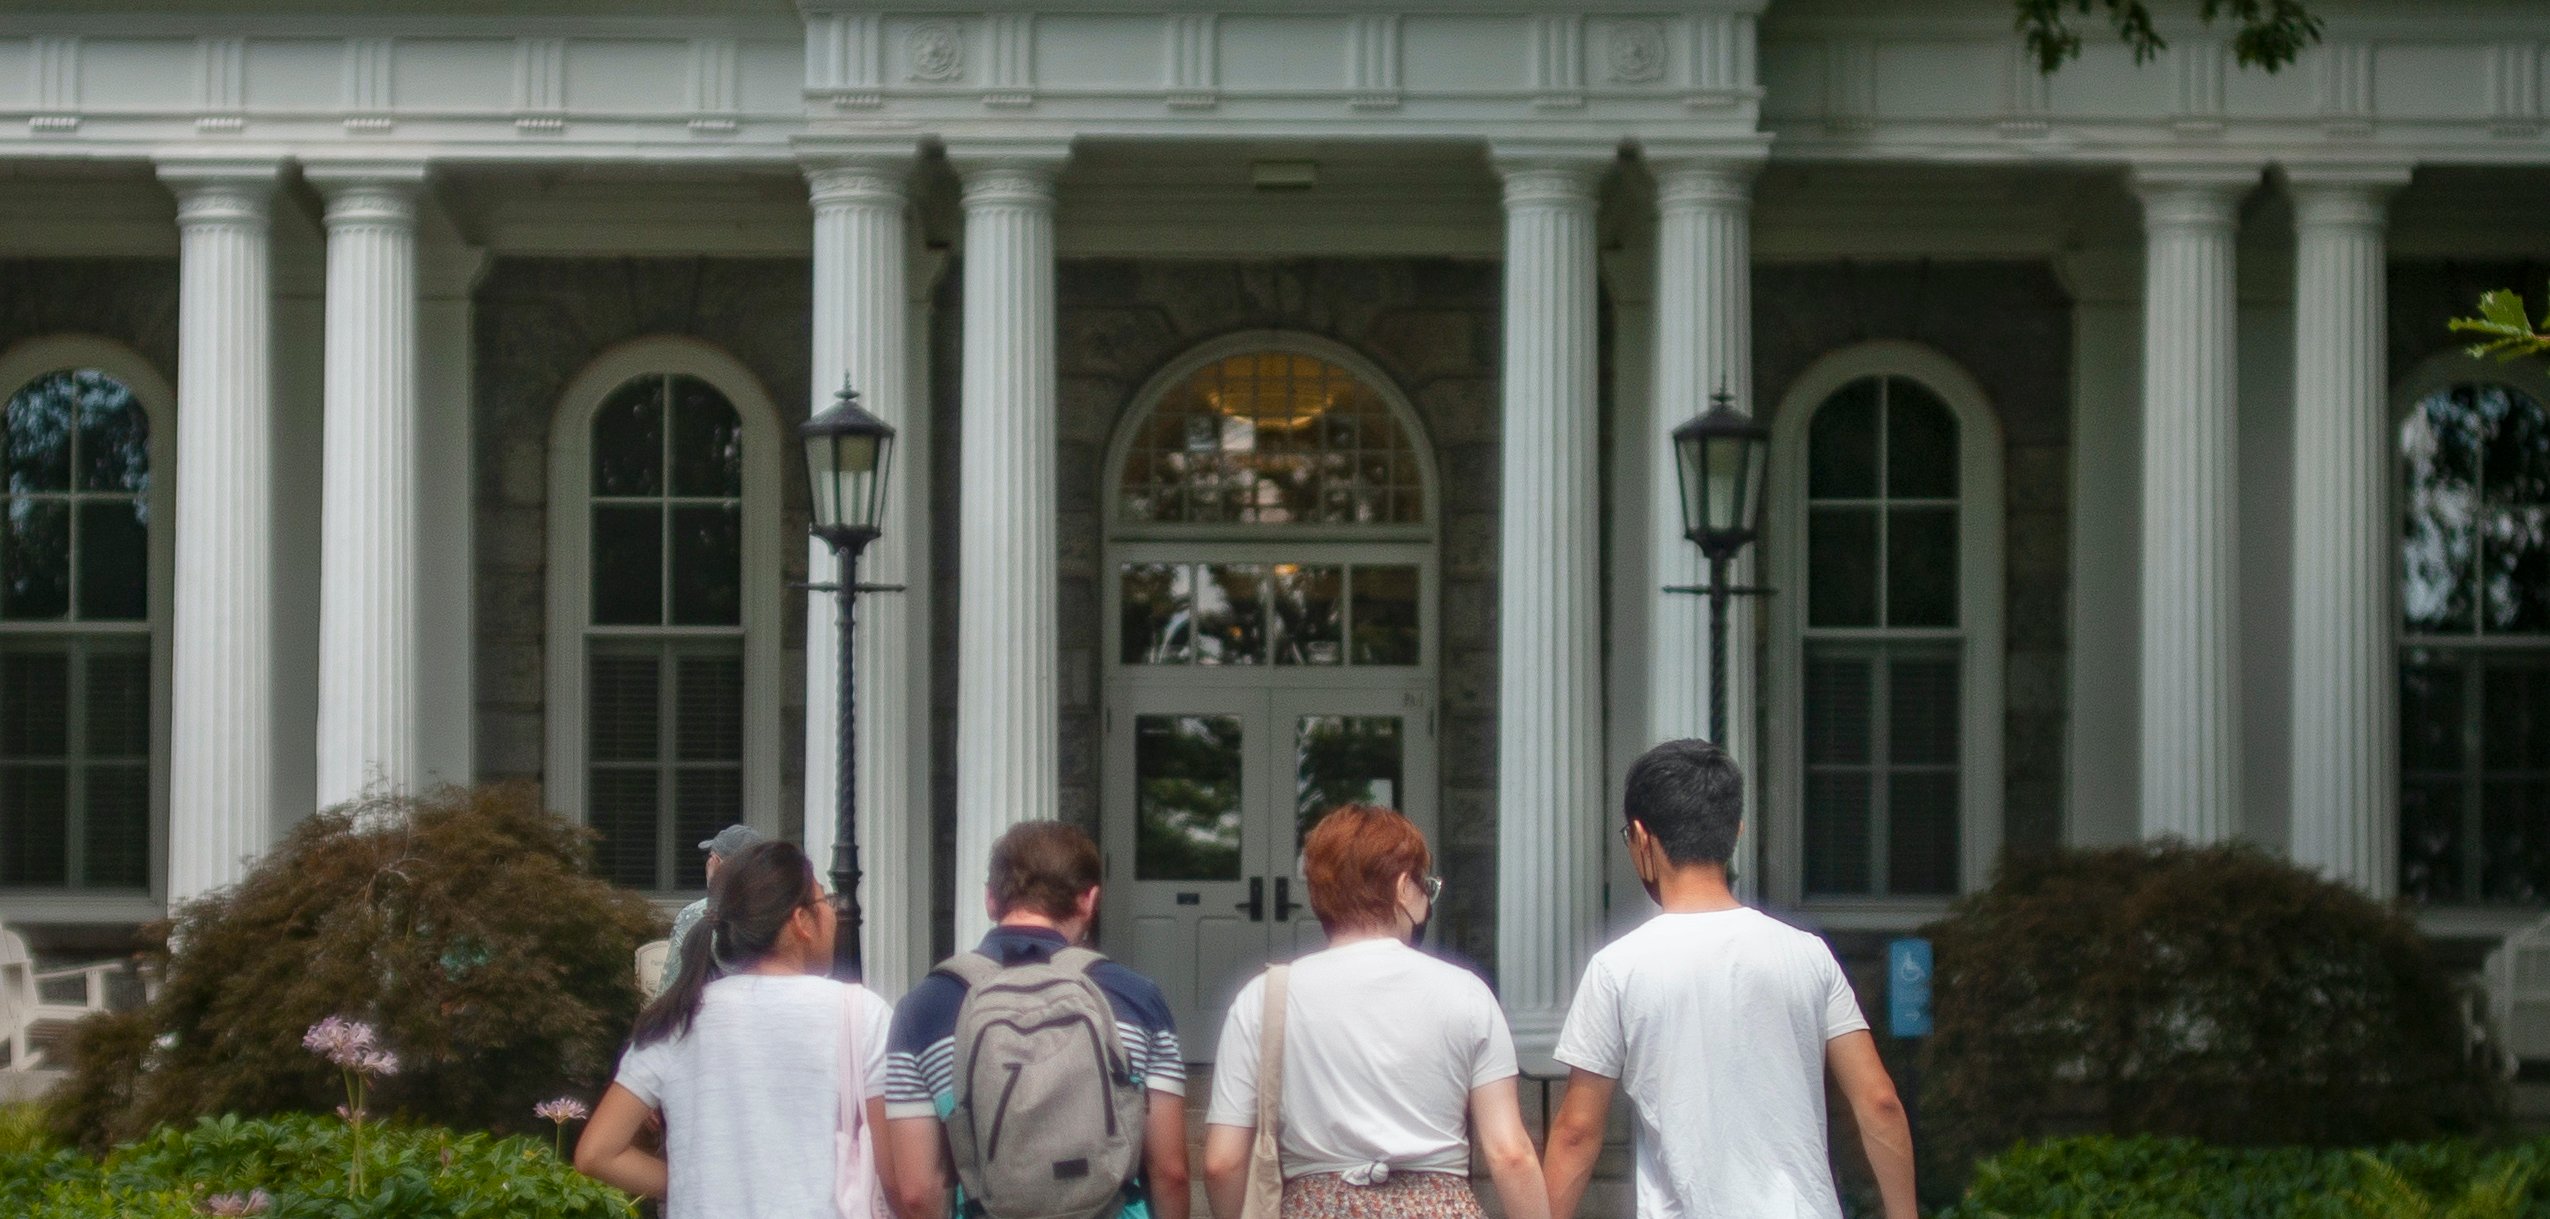 Swarthmore students walking in front of main building